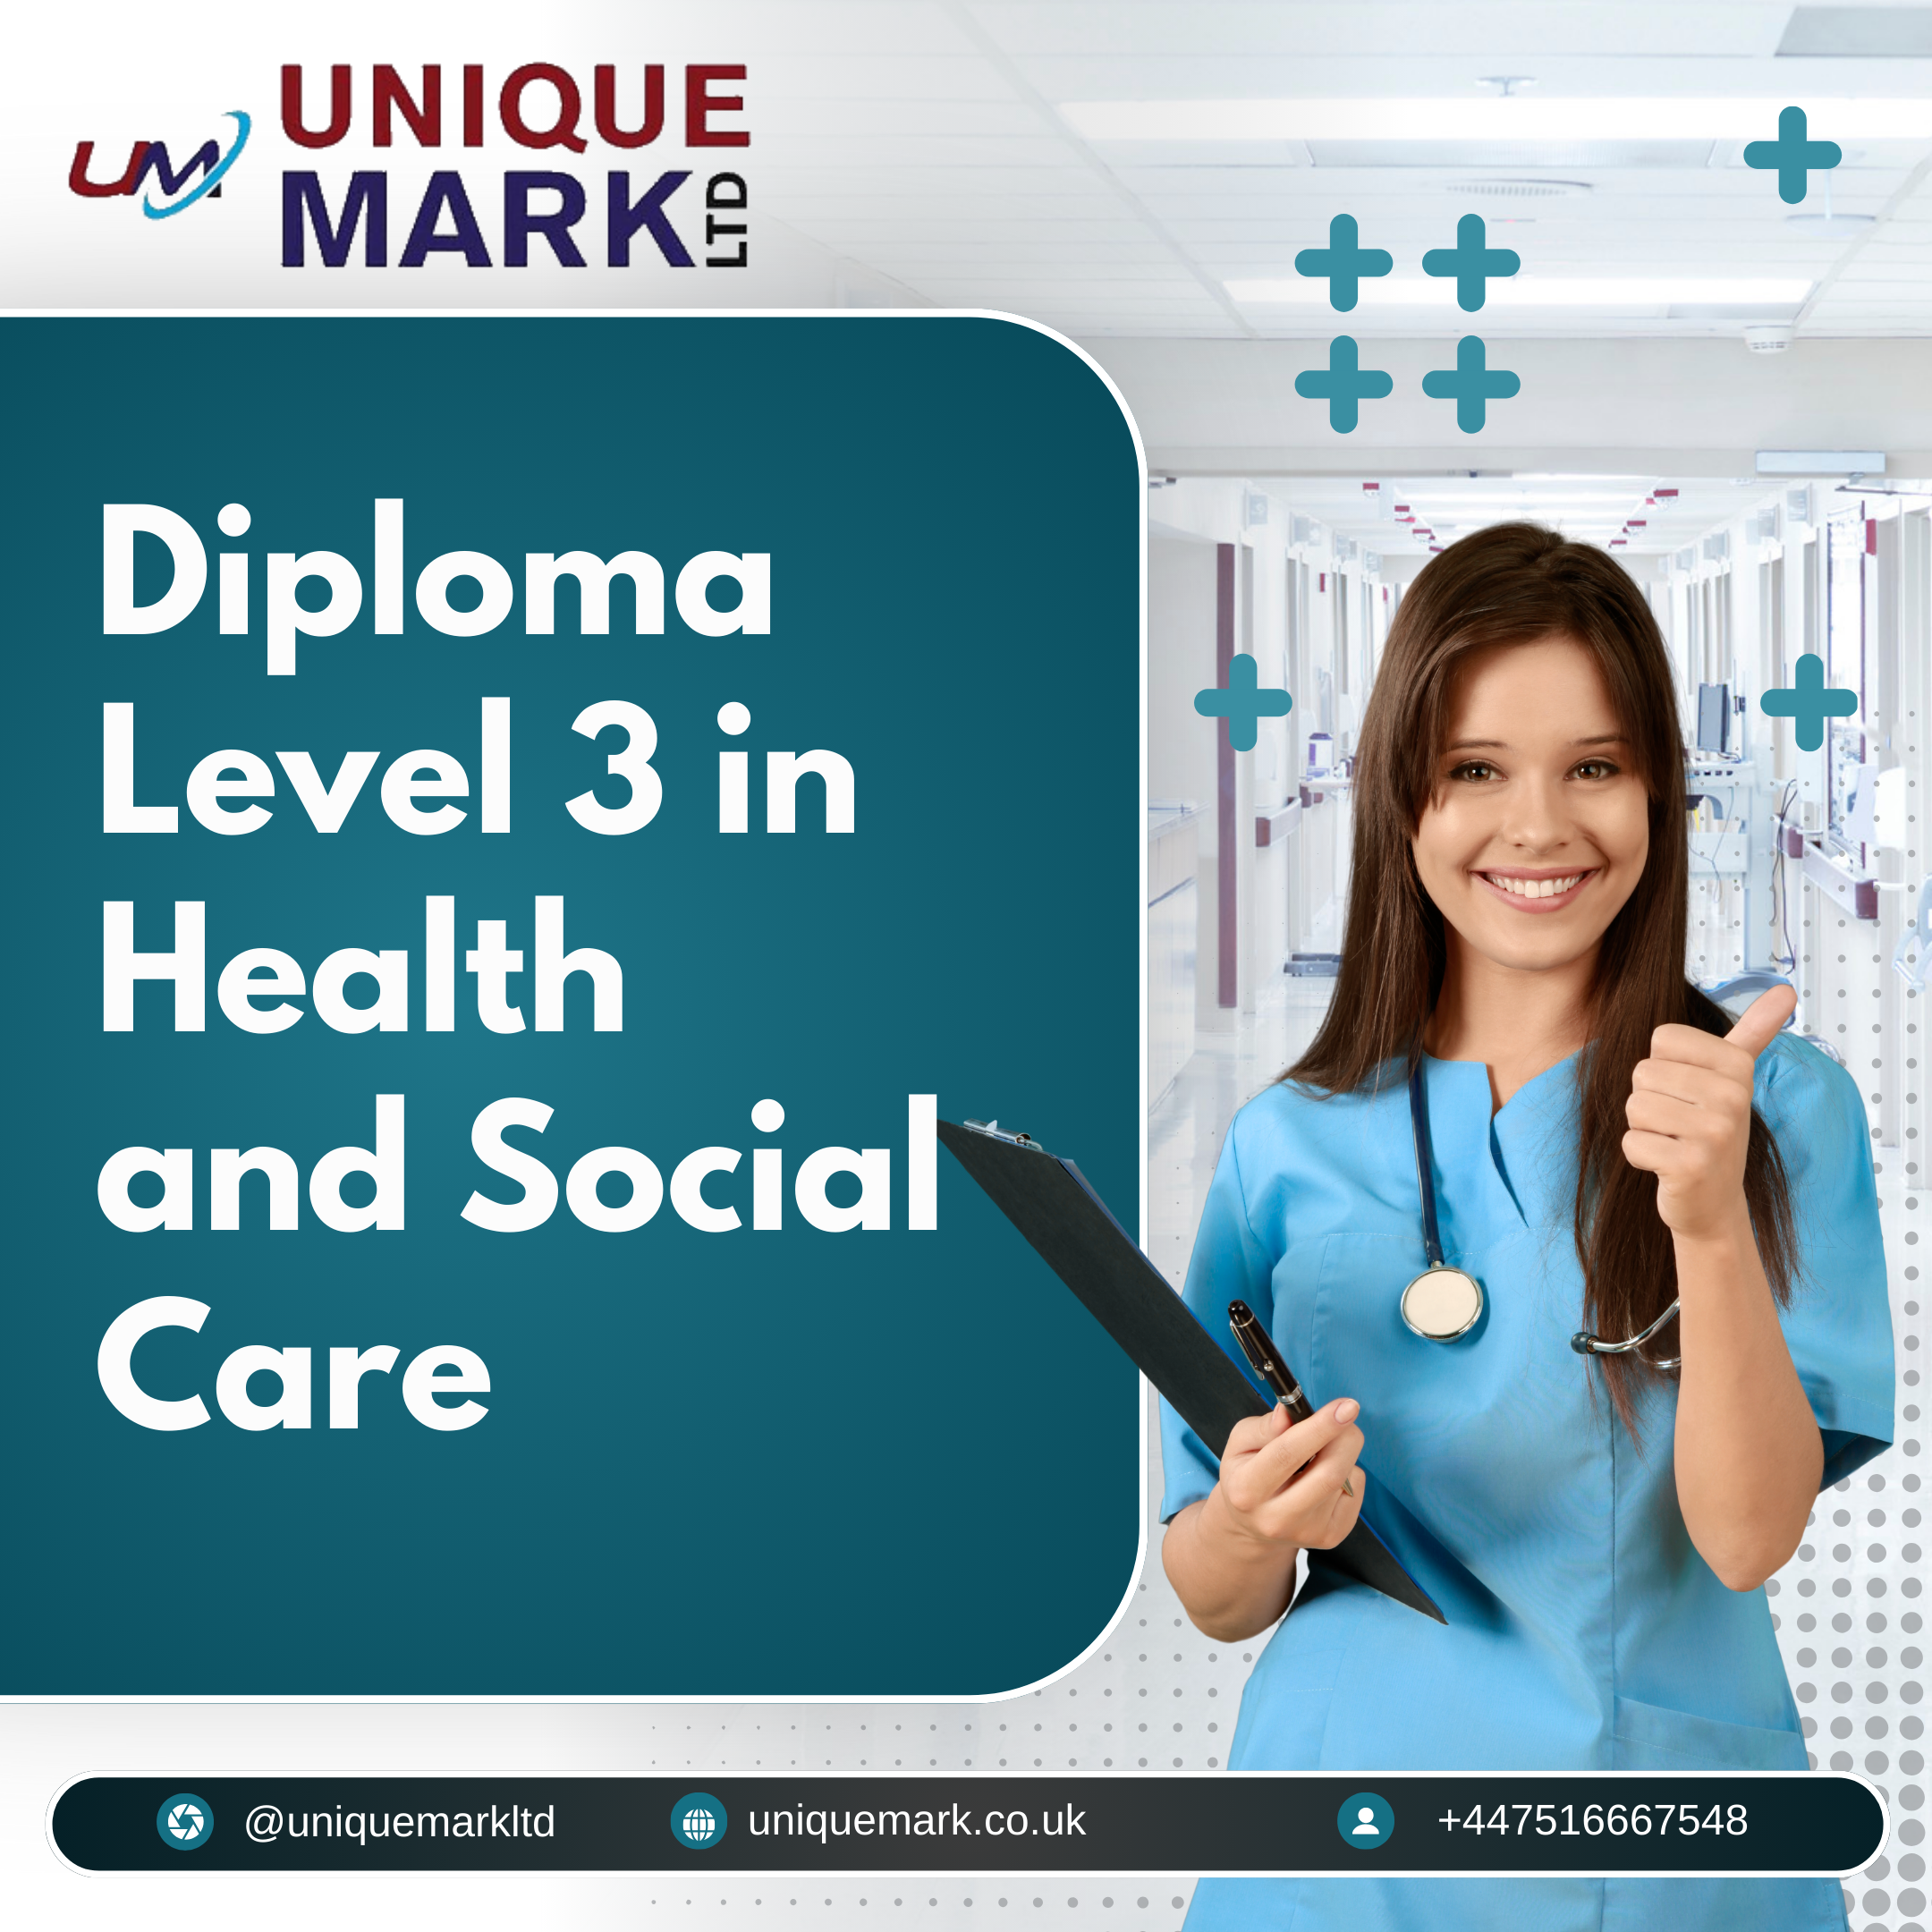 The Benefits of Pursuing a Diploma Level 3 in Health and Social Care